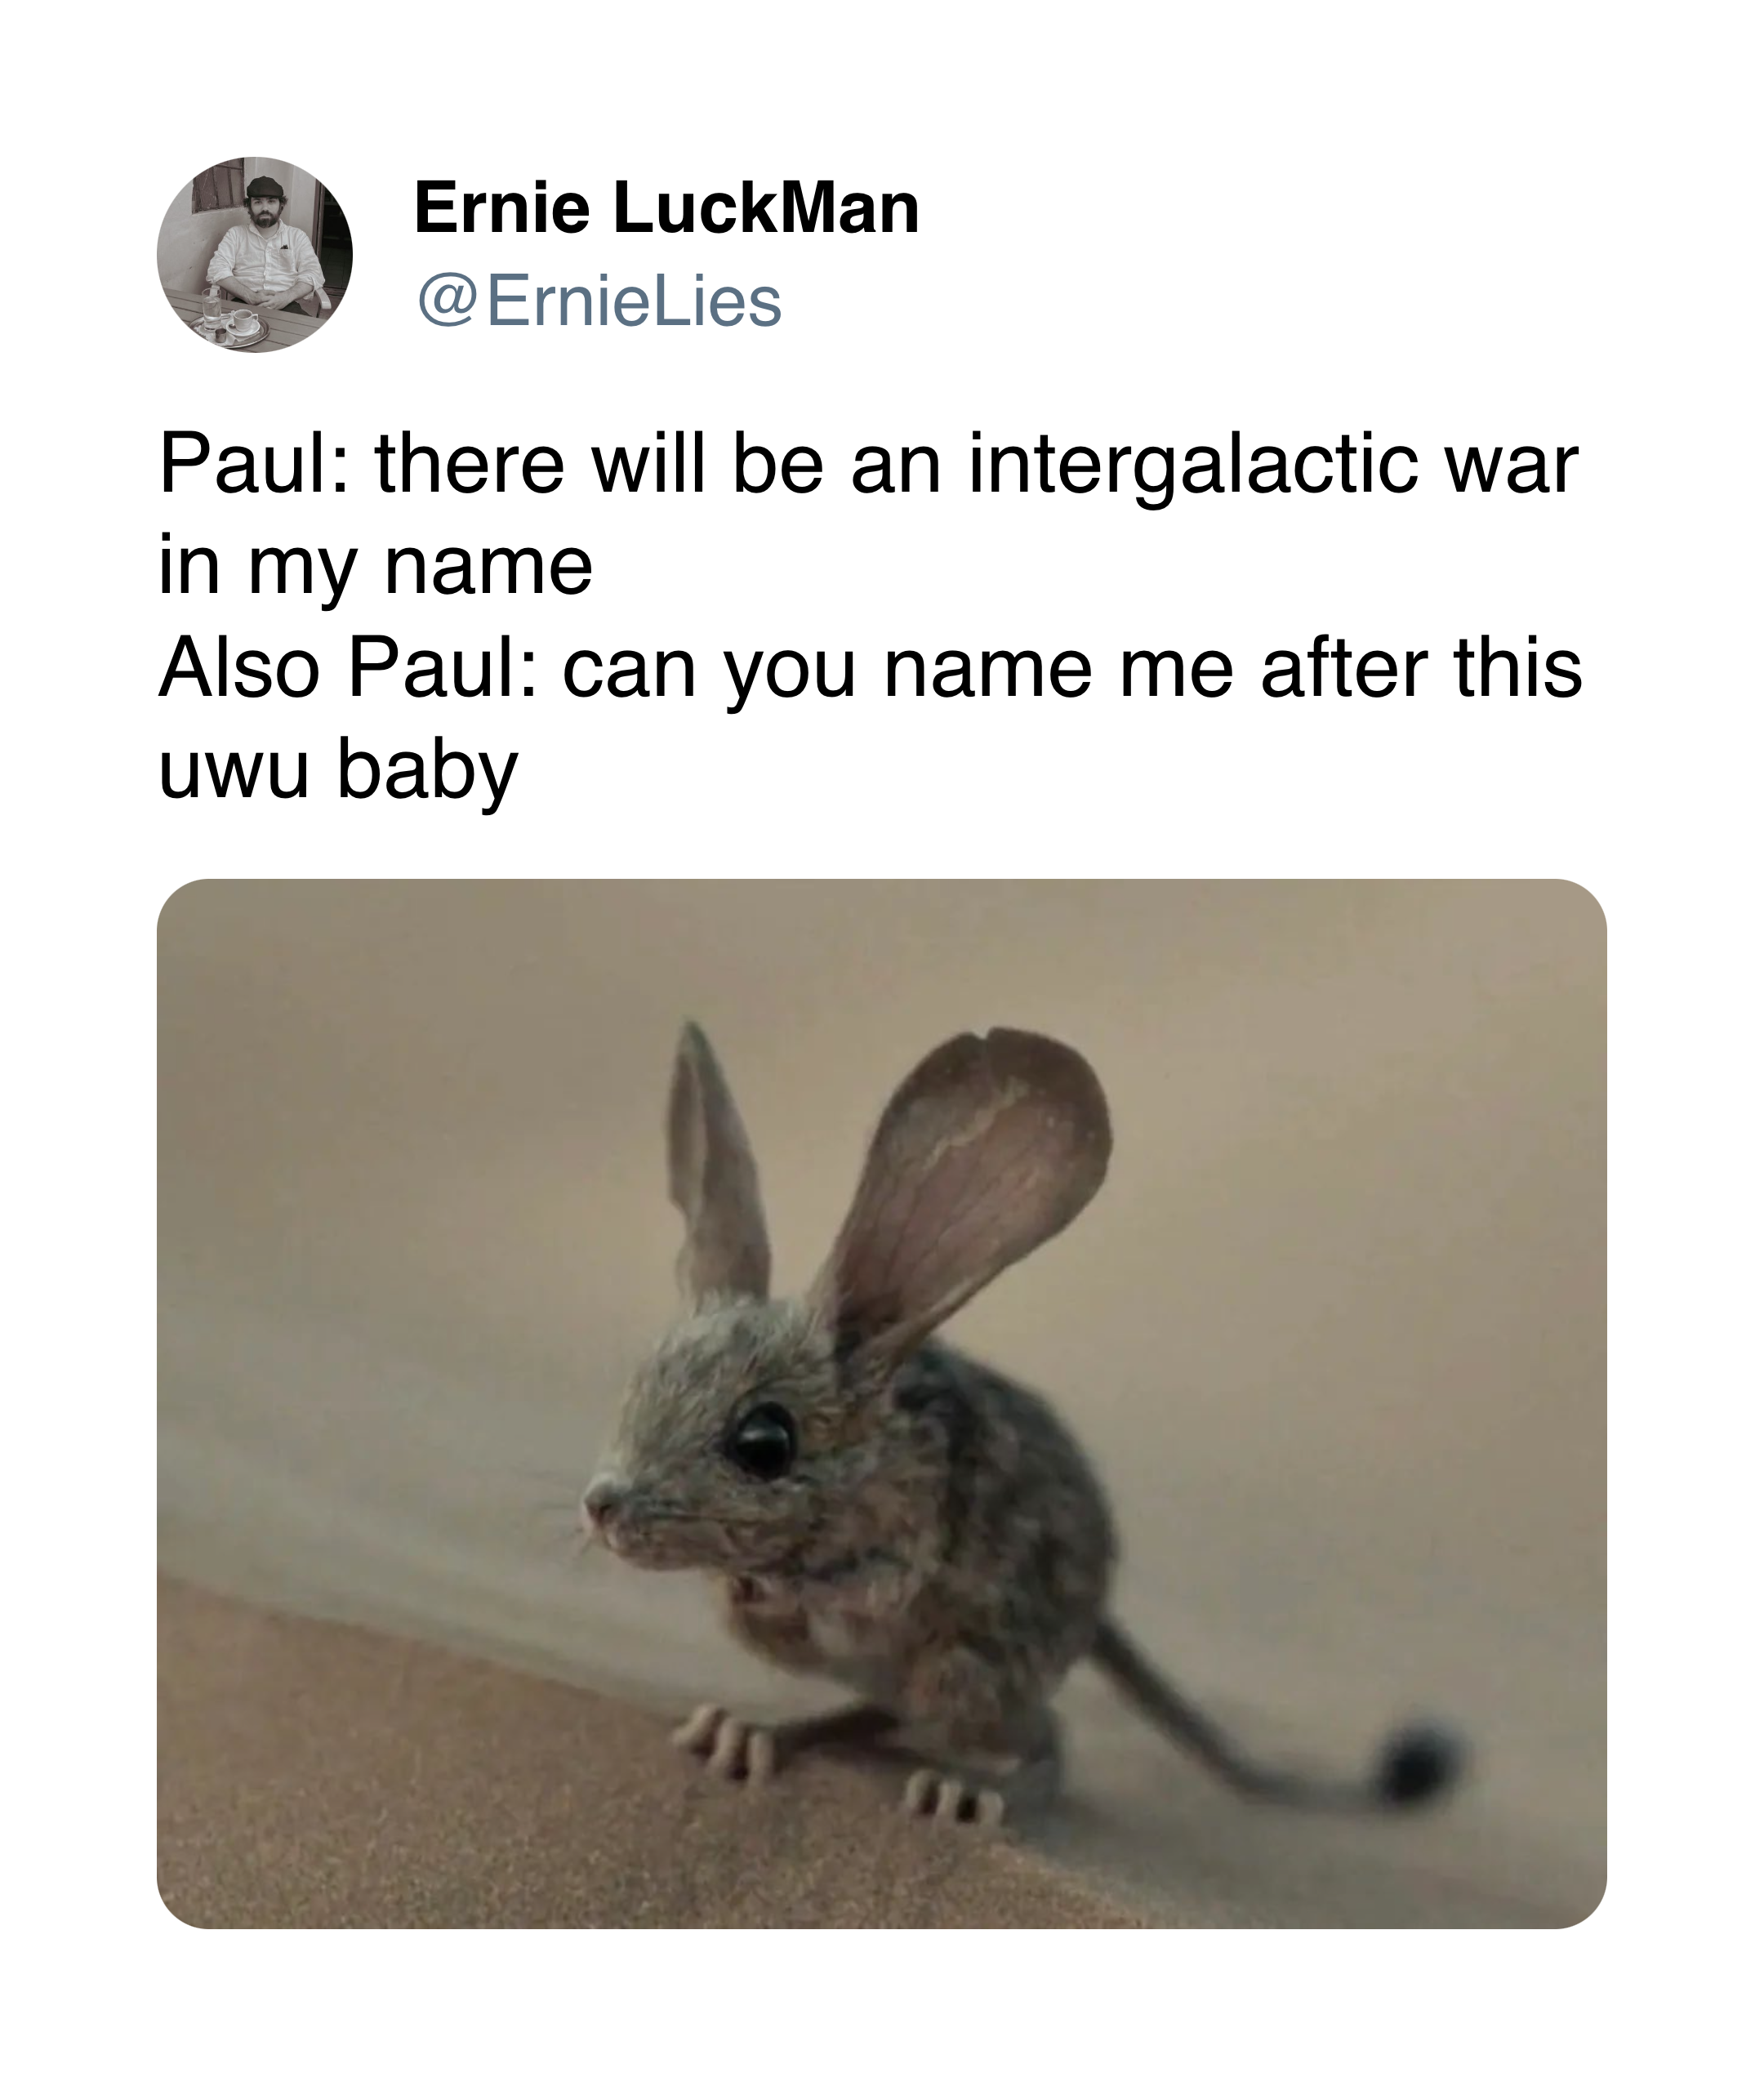 @ErnieLies on Twitter: A photo of the tiny mouse from Dune: Part One. "Paul: there will be an intergalactic war in my name. Also Paul: can you name me after this uwu baby"